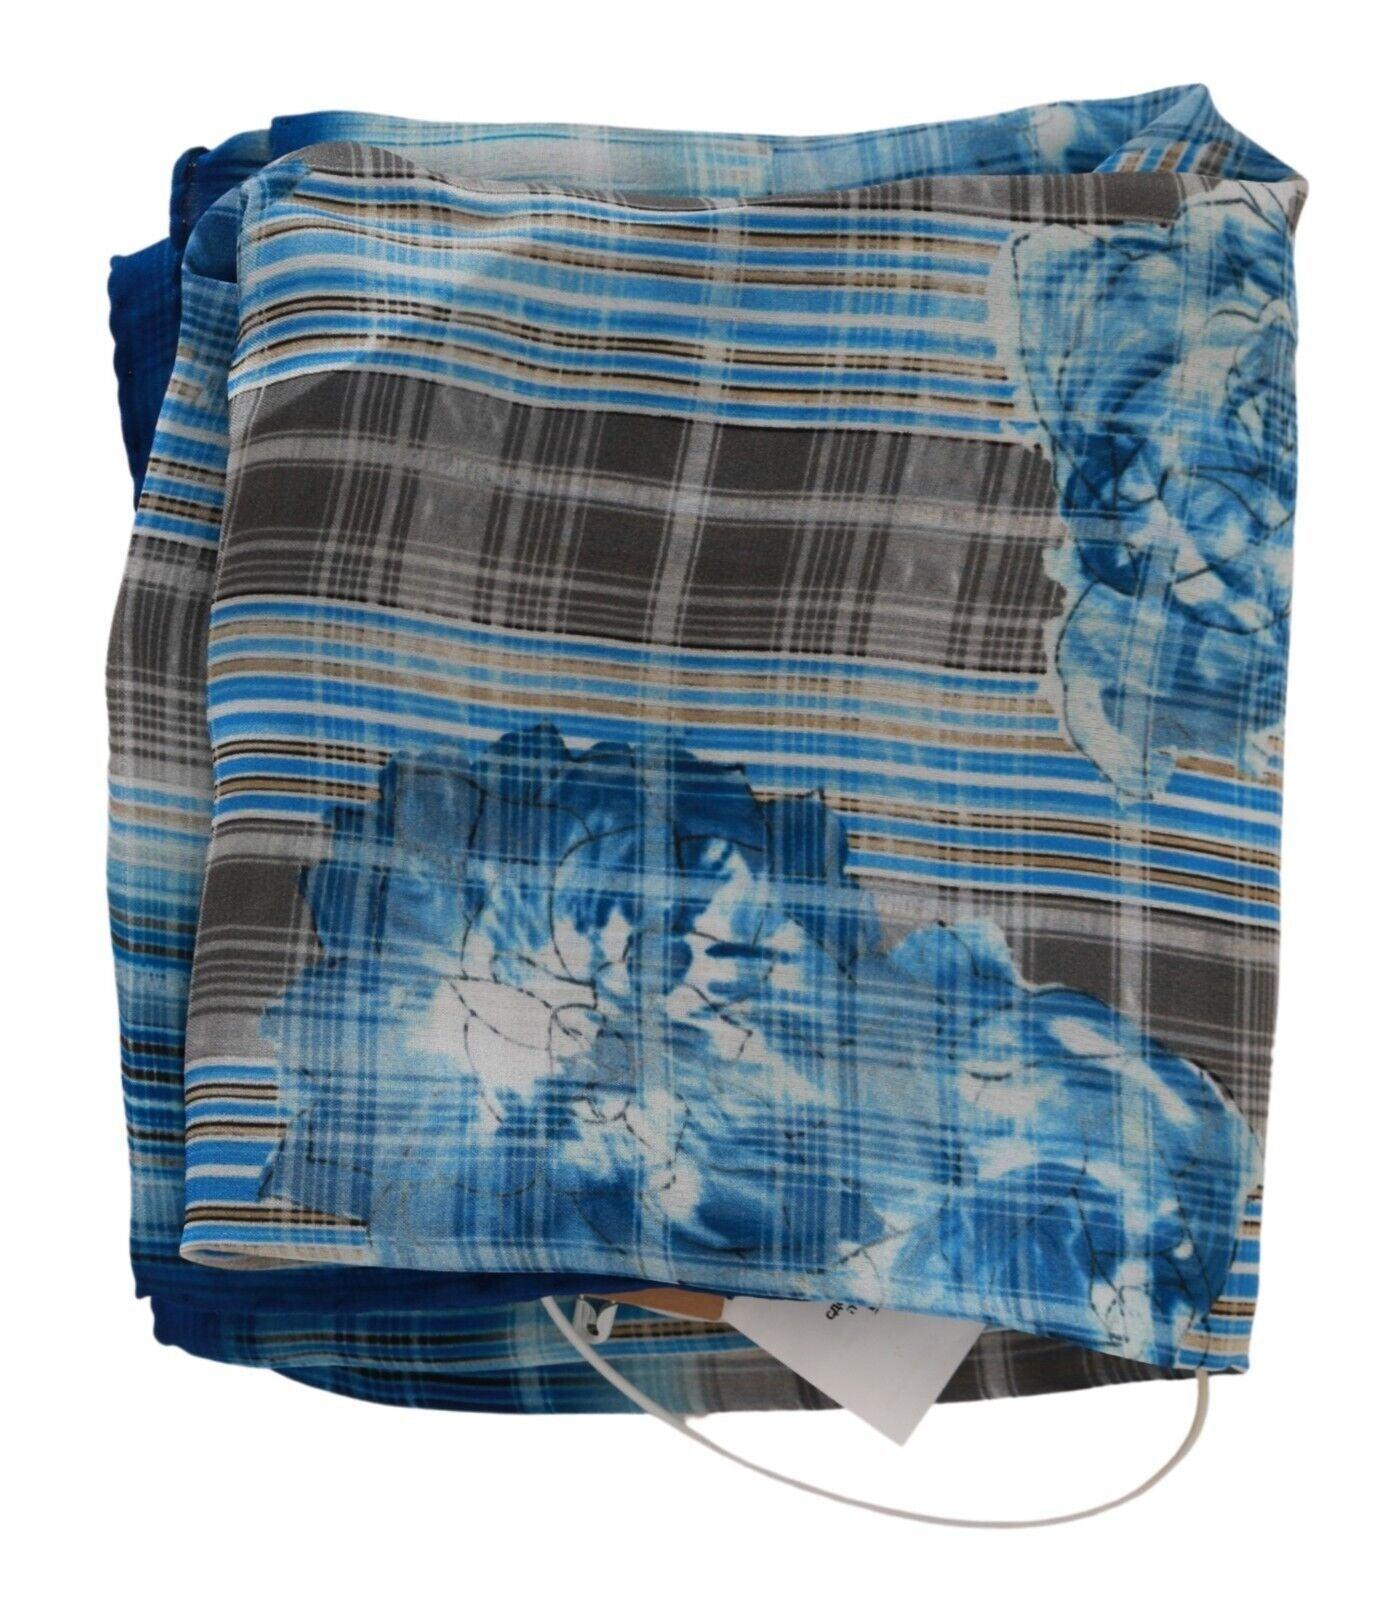 John Galliano Blue Stripe Floral Printed Bandana Cotton Square Scarf - Designed by John Galliano Available to Buy at a Discounted Price on Moon Behind The Hill Online Designer Discount Store